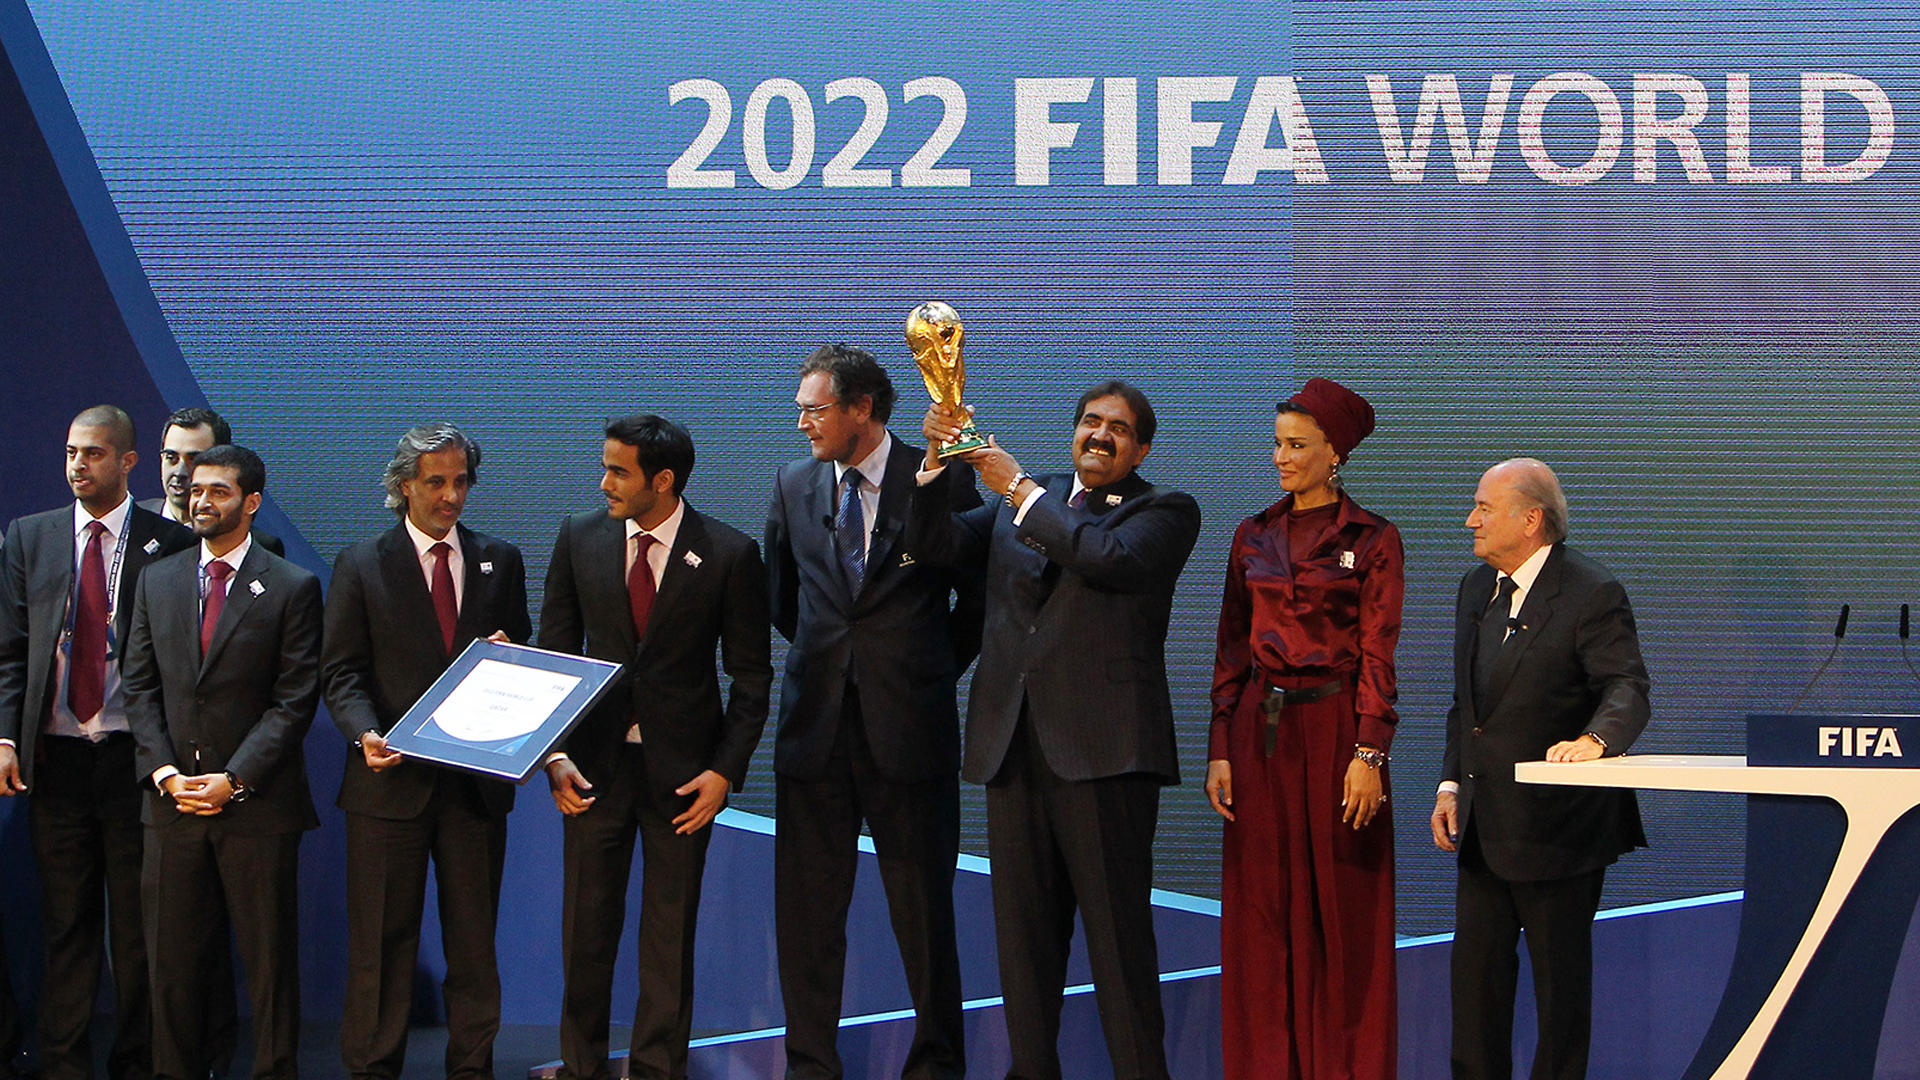 Orientalism and Media Coverage of the 2022 Qatar World Cup